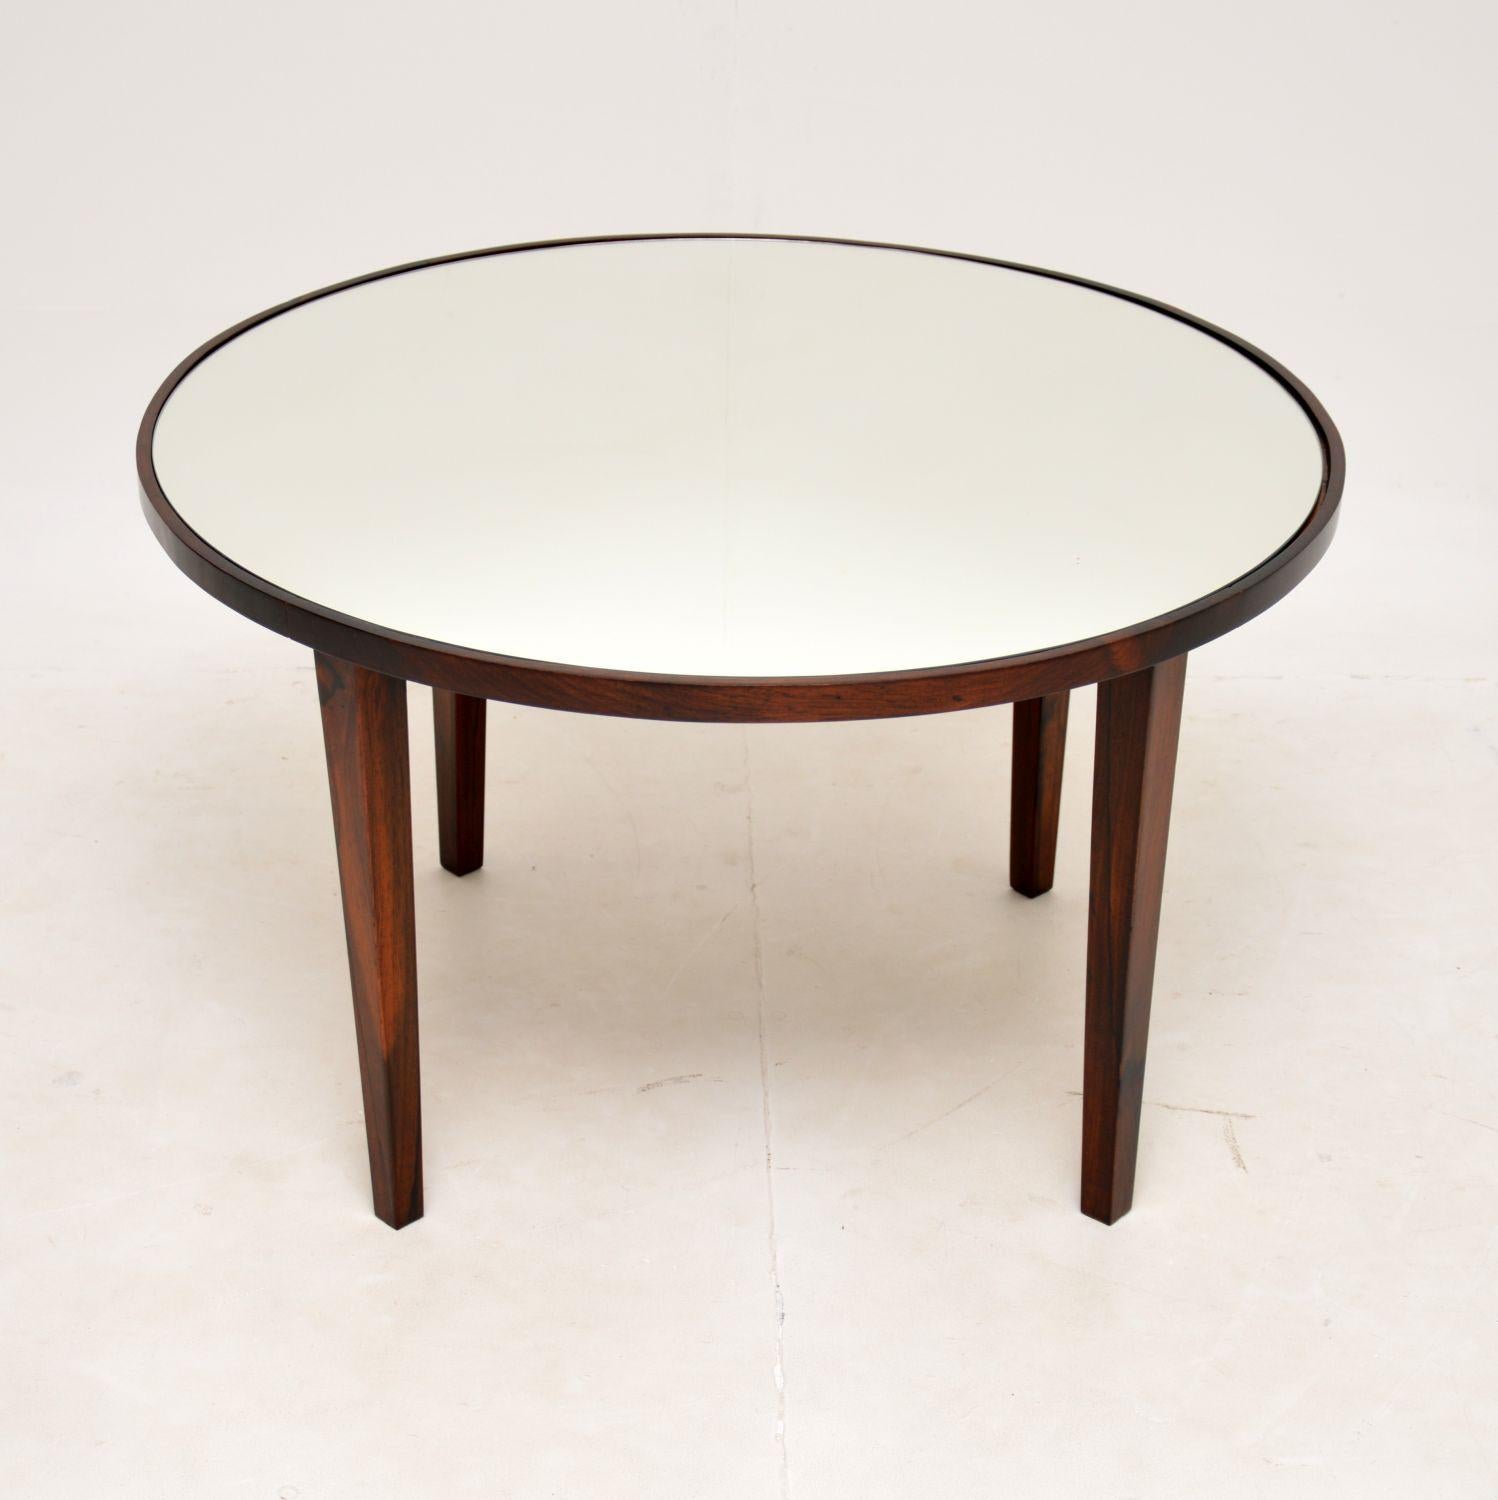 A very stylish and well made vintage coffee table. This was made in Brazil, it dates from the 1960’s.

It is of superb quality, with lovely grain patterns and an inset mirrored glass top.

We have had the frame stripped and re-polished to a very